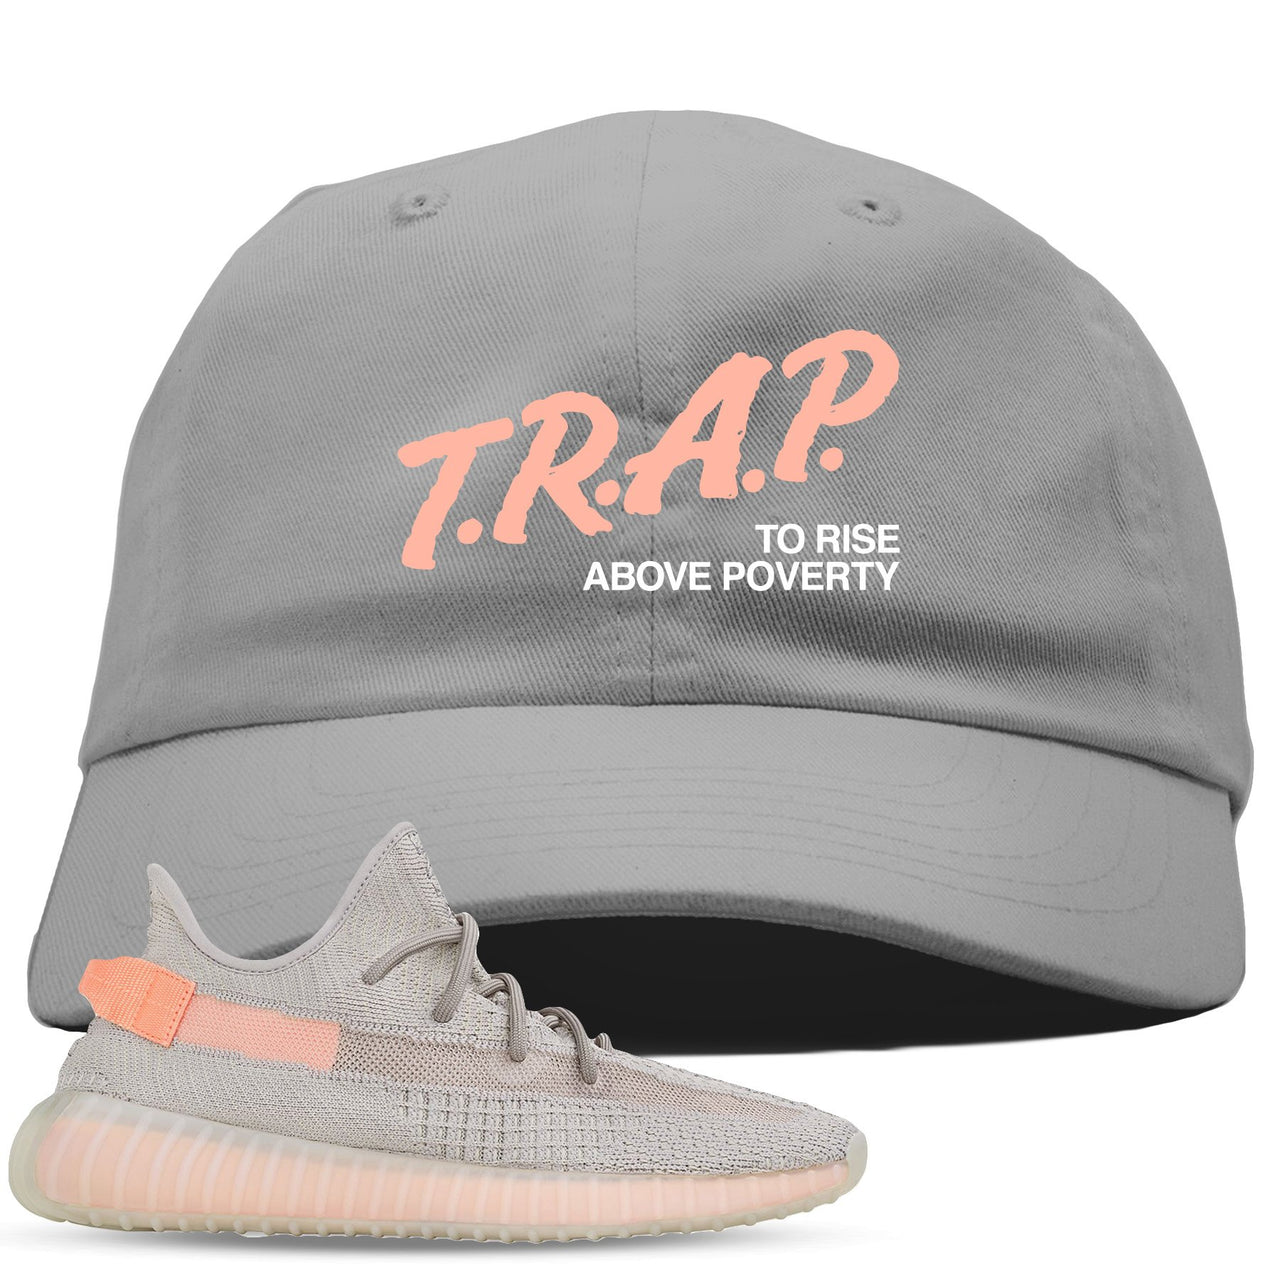 True Form v2 350s Dad Hat | Trap To Rise Above Poverty, Light Gray